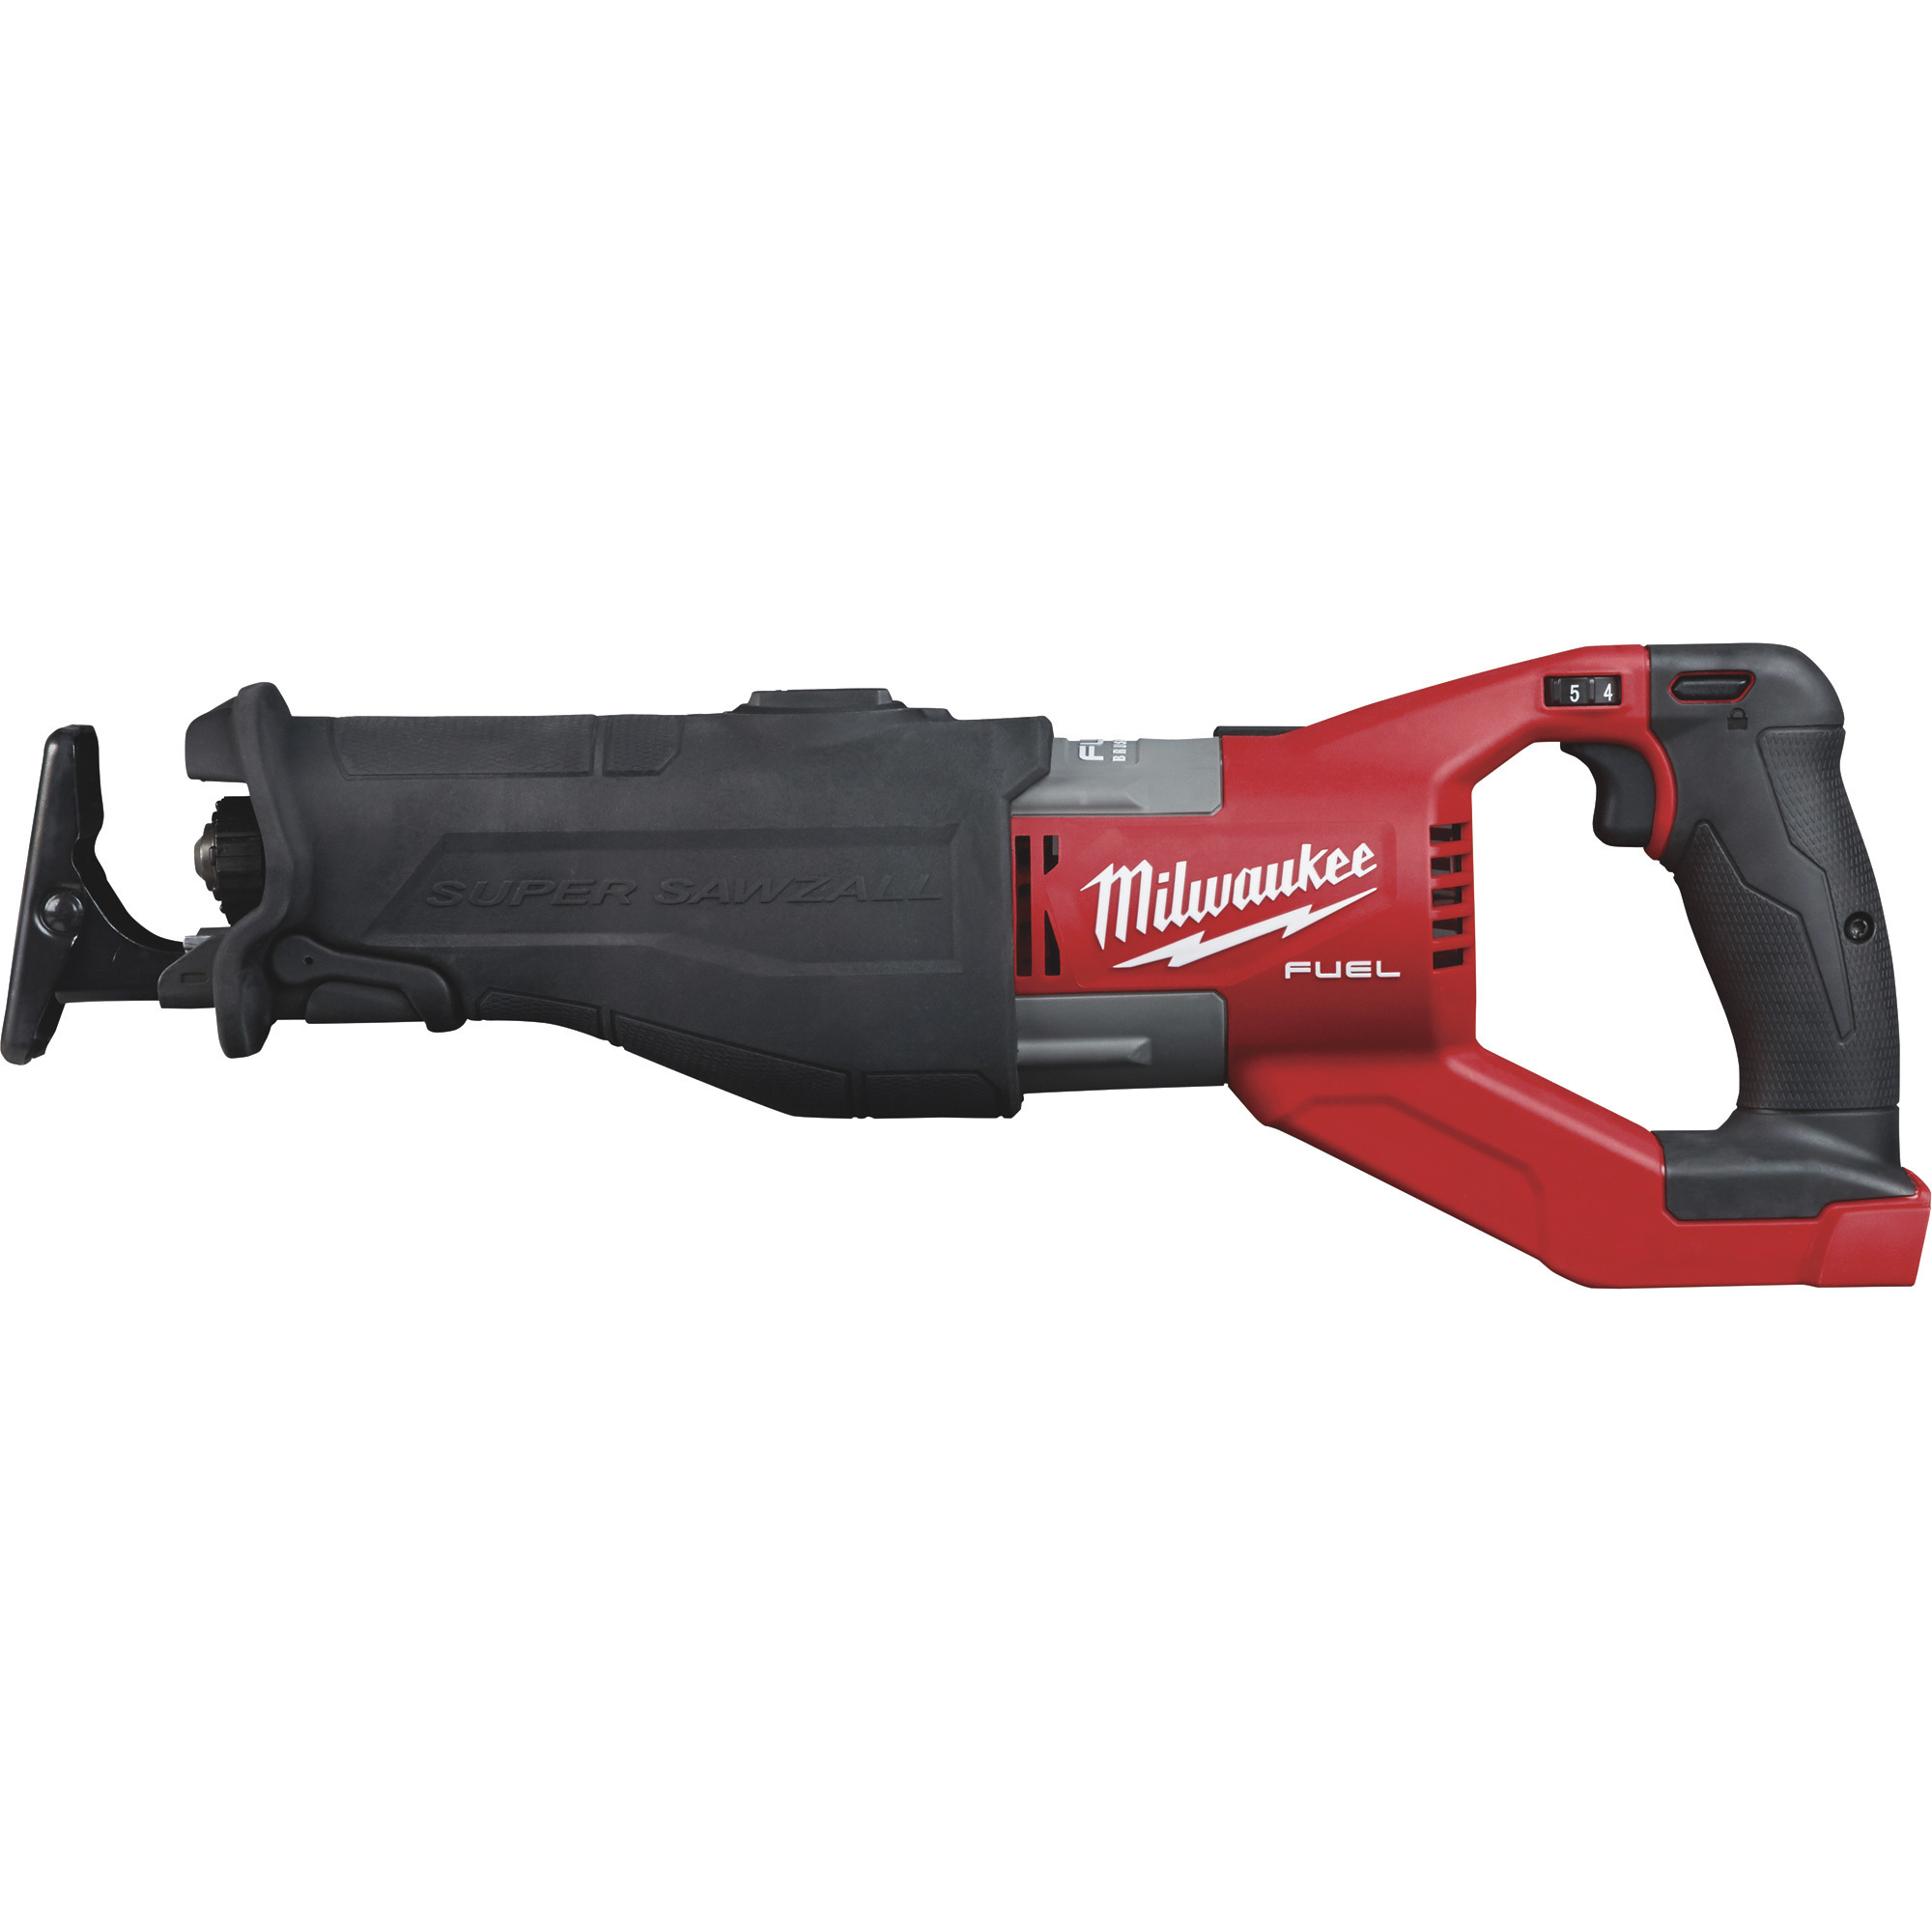 M18 FUEL Super Sawzall — Tool Only, Model - Milwaukee 2722-20